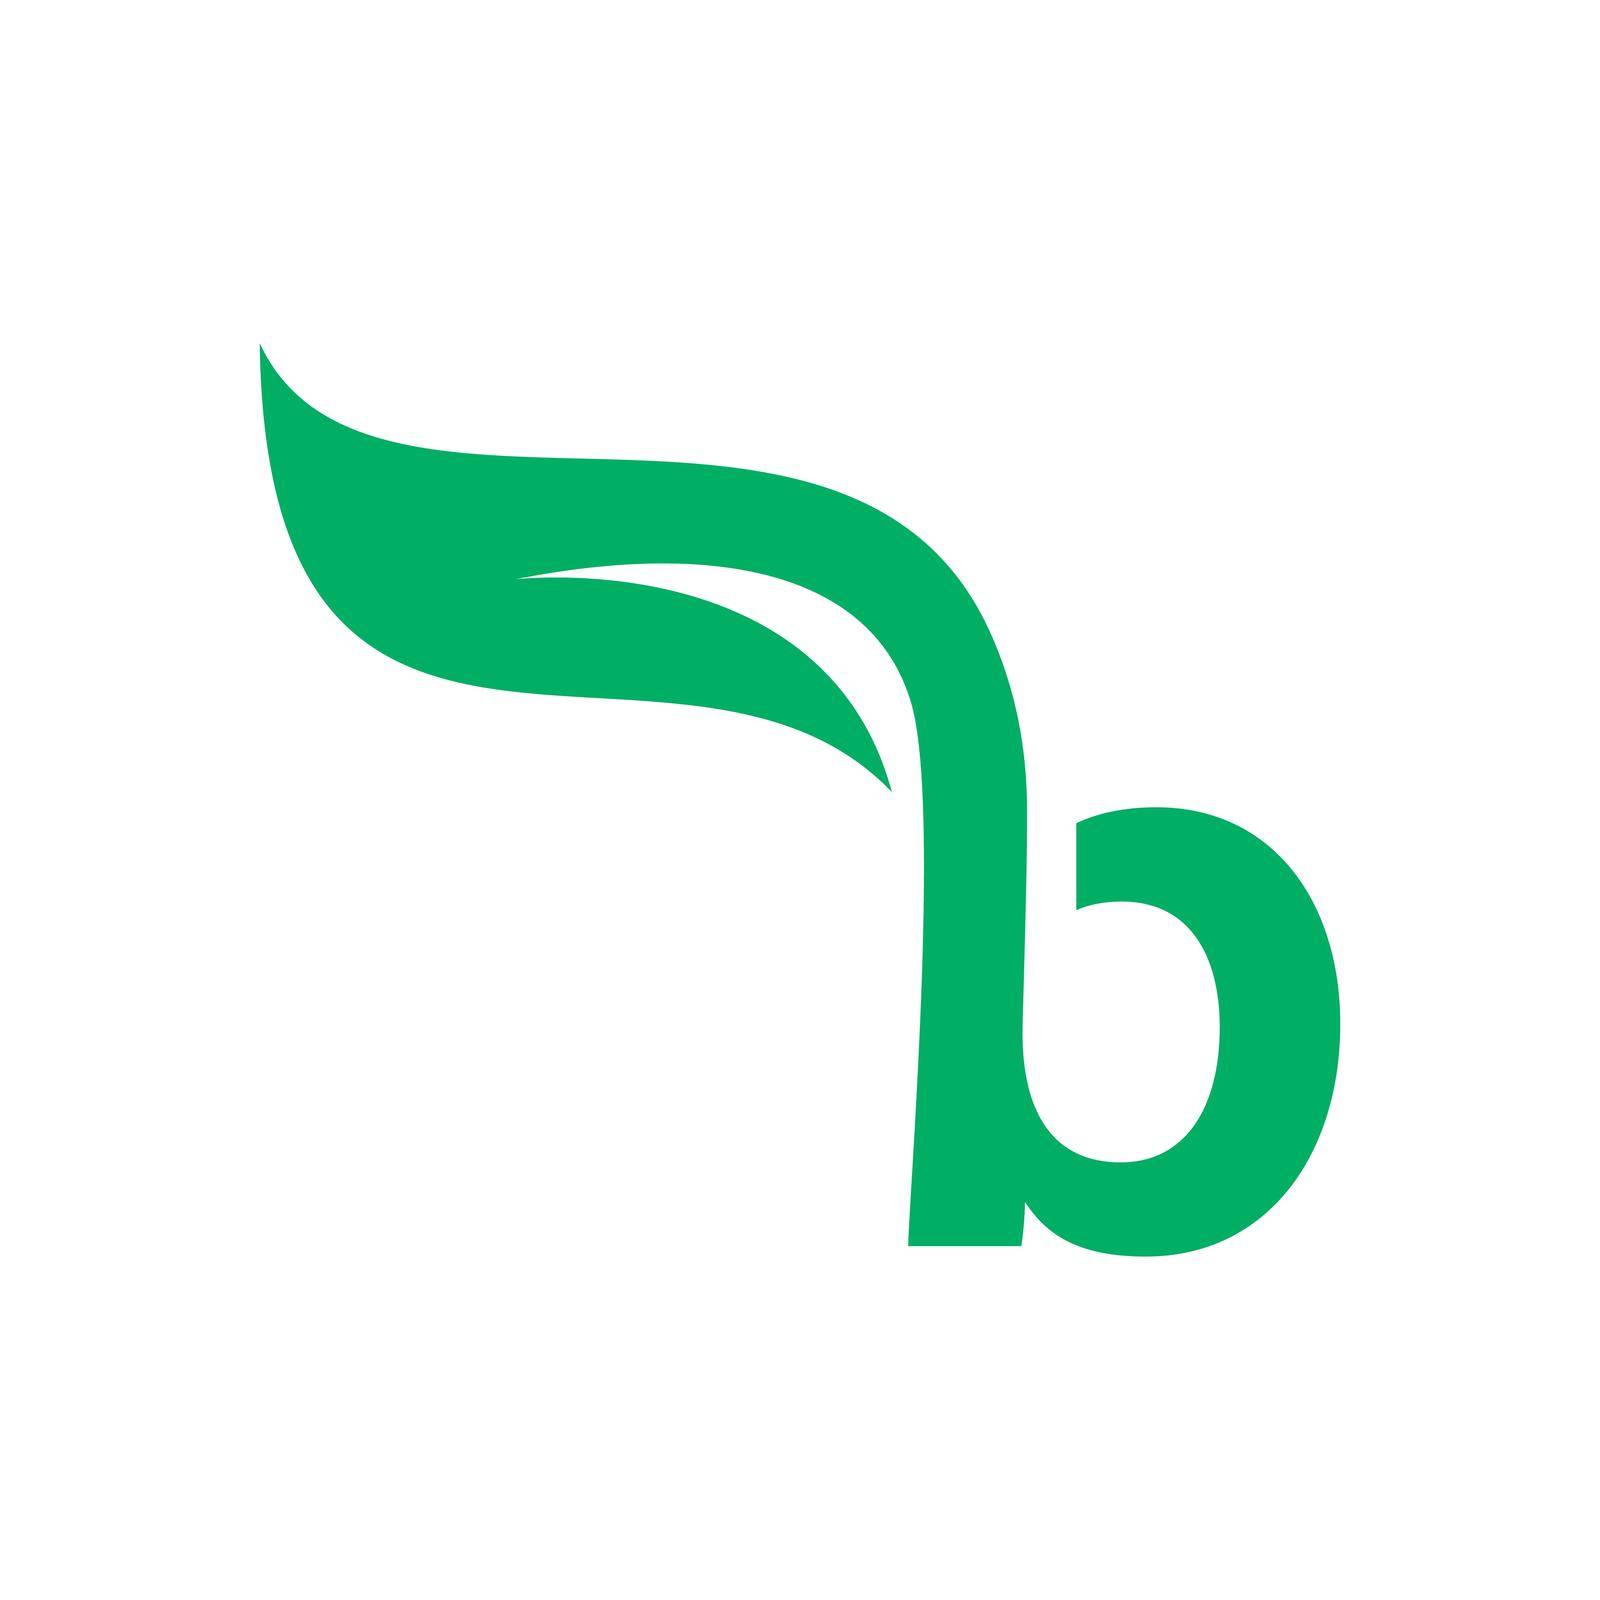 B Initial letter with green leaf logo vector template